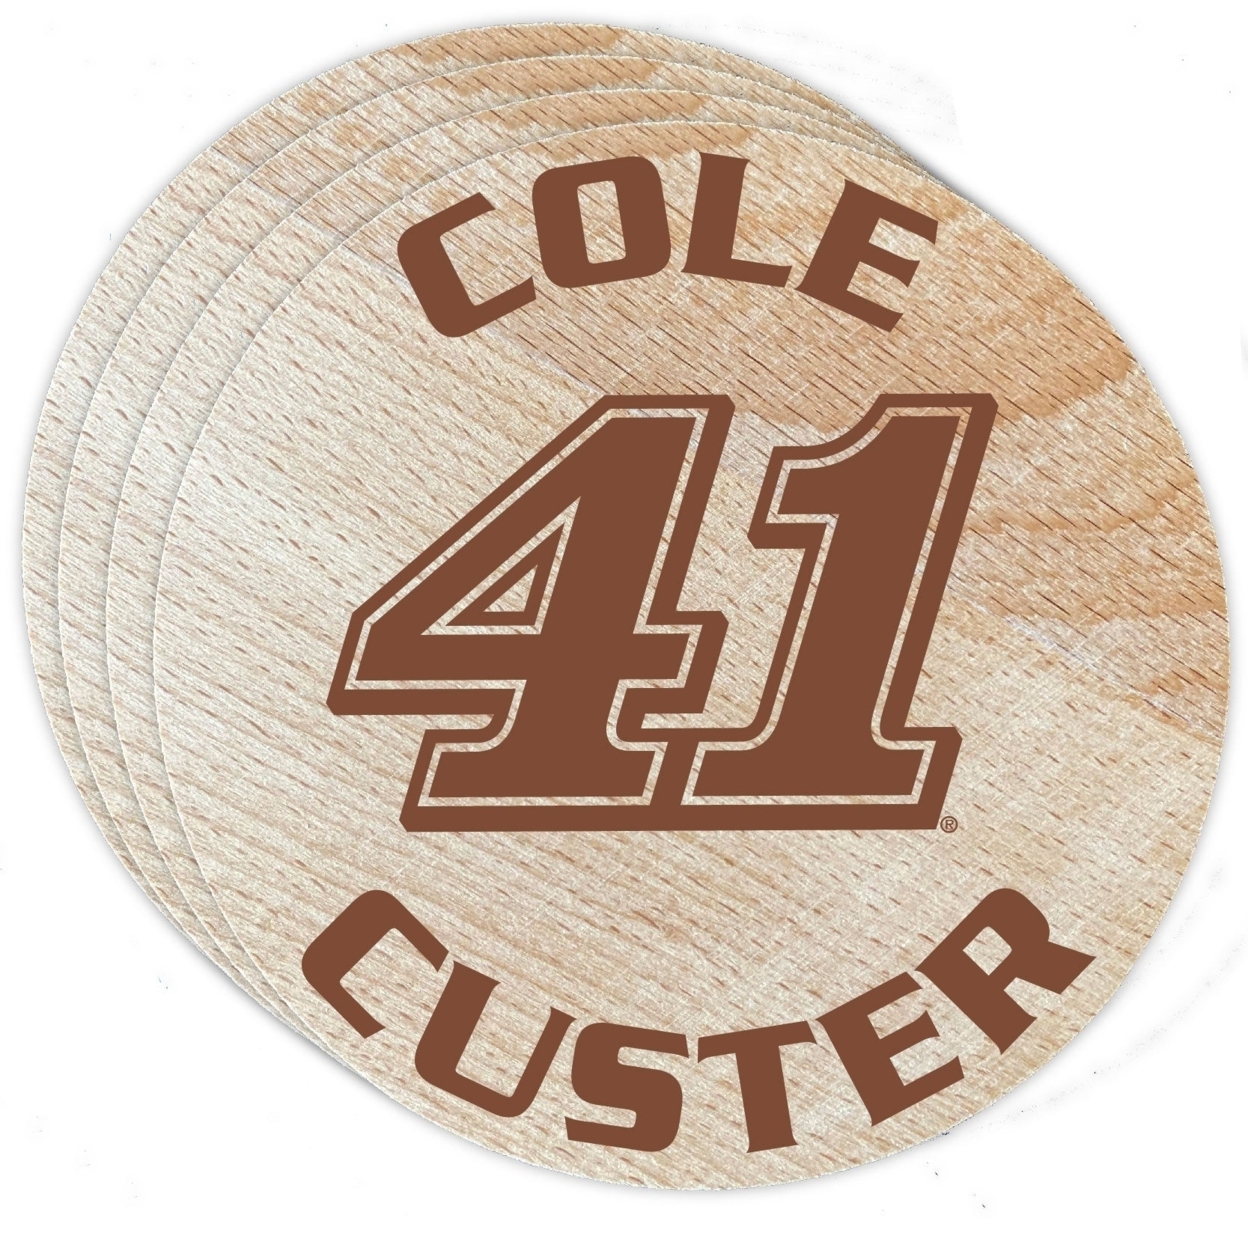 R and R Imports Nascar #41 Cole Custer Wood Coaster Engraved 4-Pack